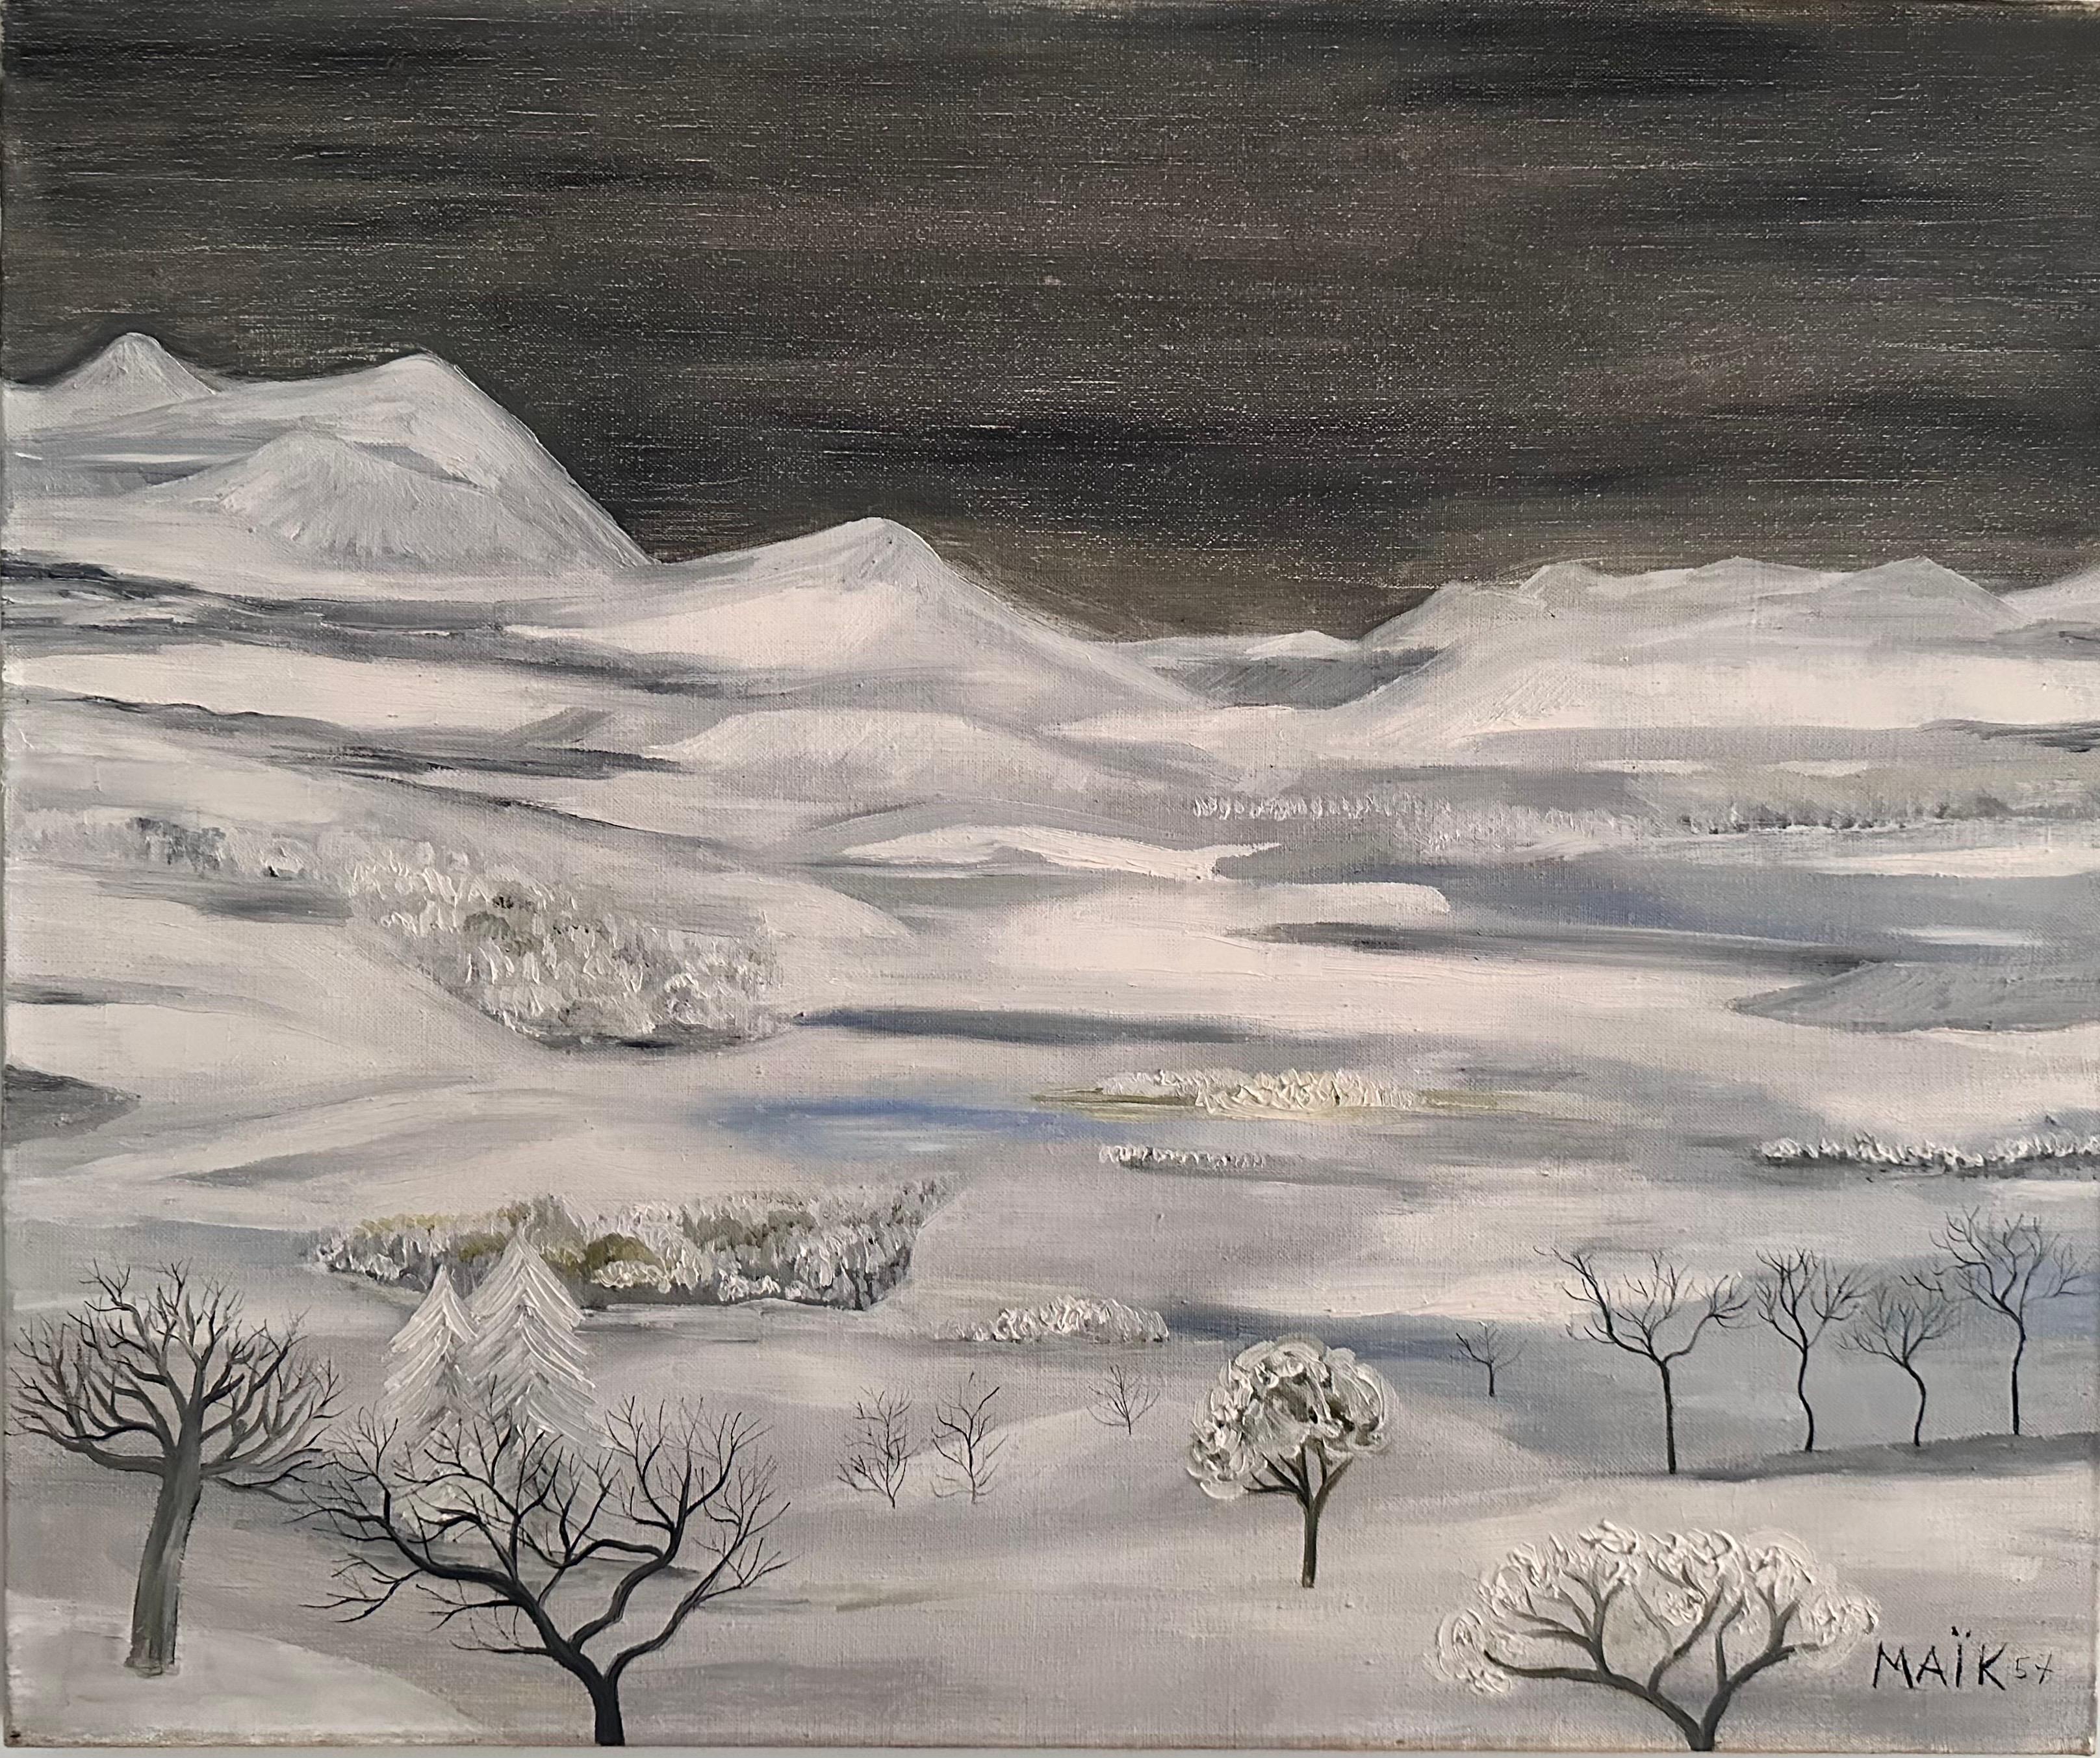 Oil on canvas
by Henri Hecht MAÏK (1922-1993).
“Snow Landscape”.
sign and date lower right “MAÏK 57”.
Framed with a natural oak and painted French frame, circa 1950.
Canvas dimensions: 54 x 64,5 cm.
Overall dimensions: 68 x 79,5 cm.